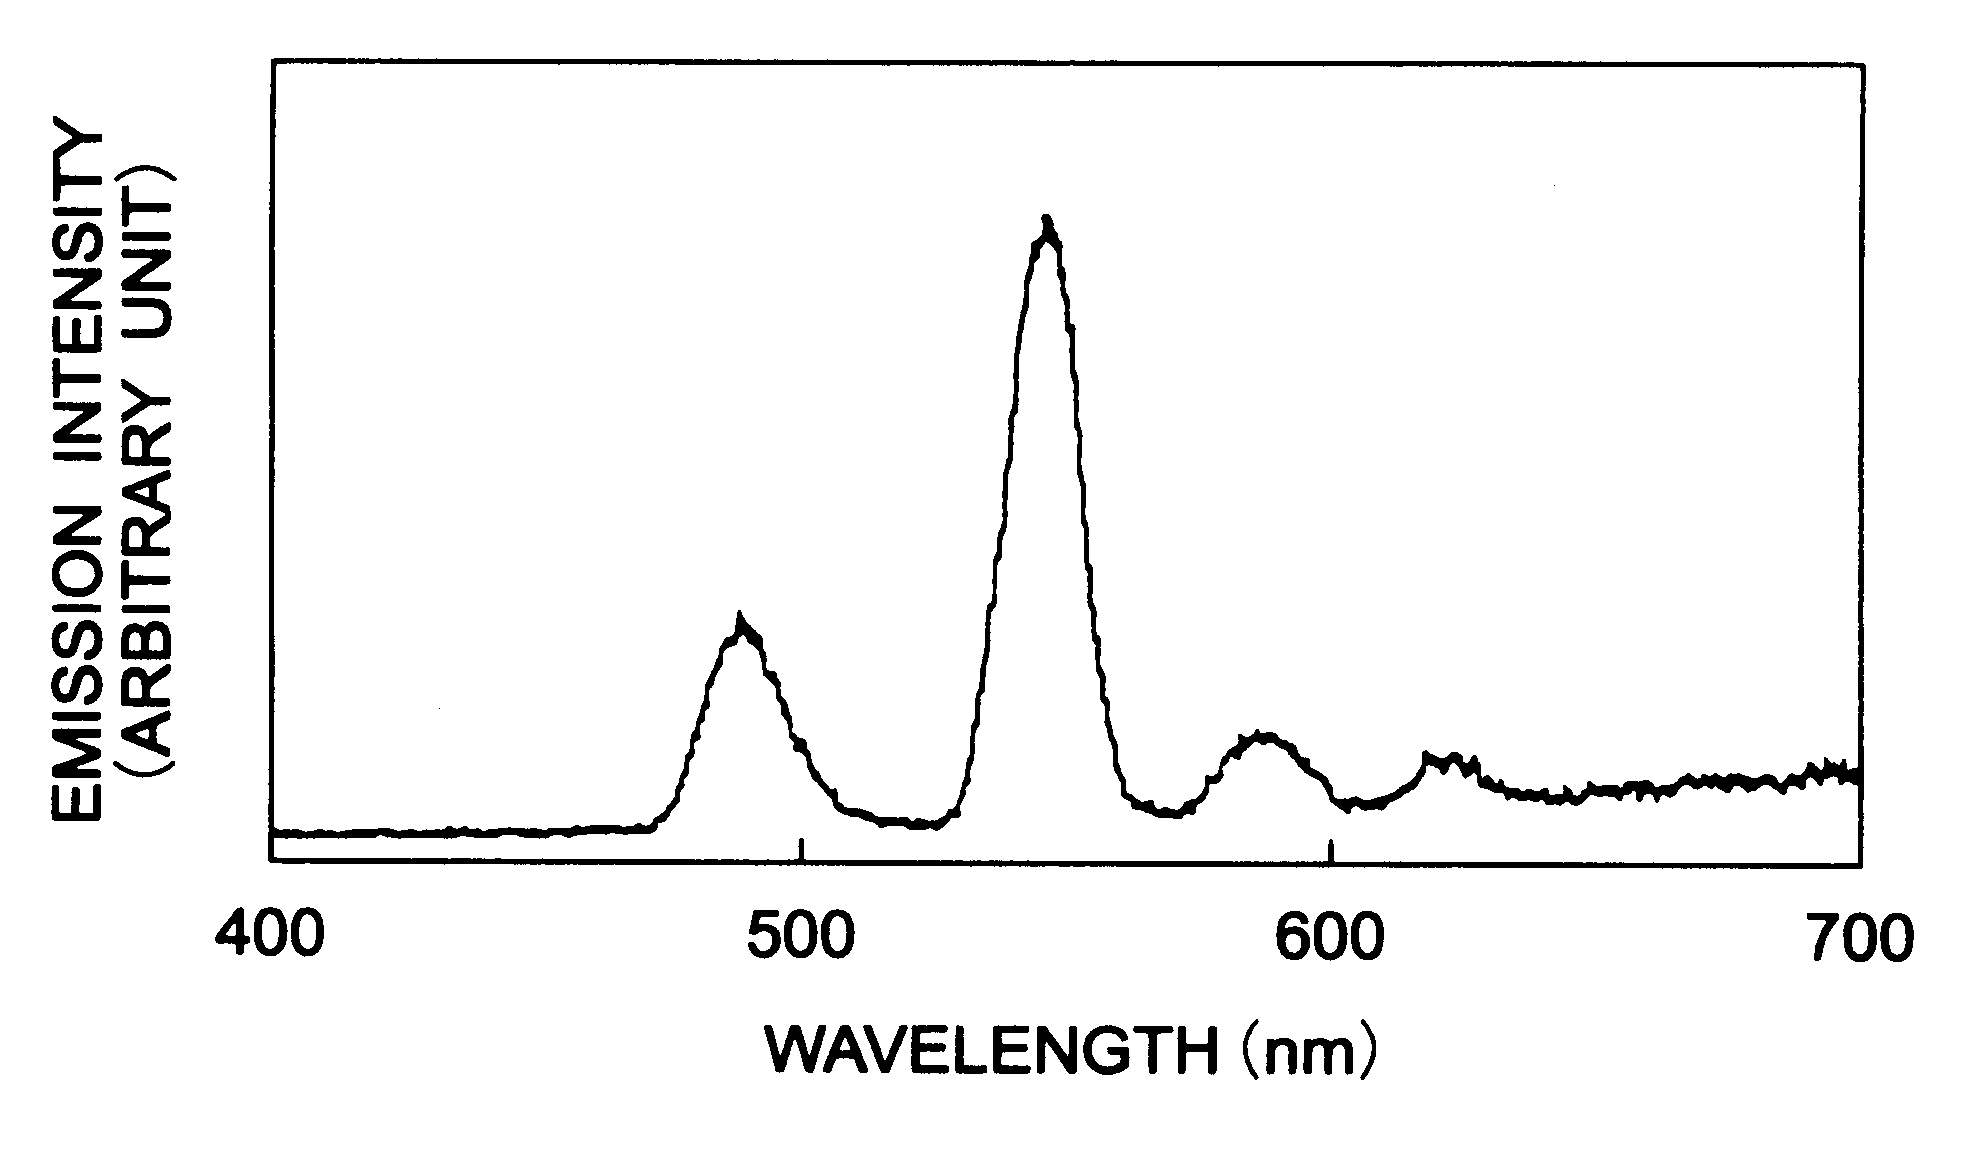 Oxide glass showing long afterglow and accelerated phosphorescence